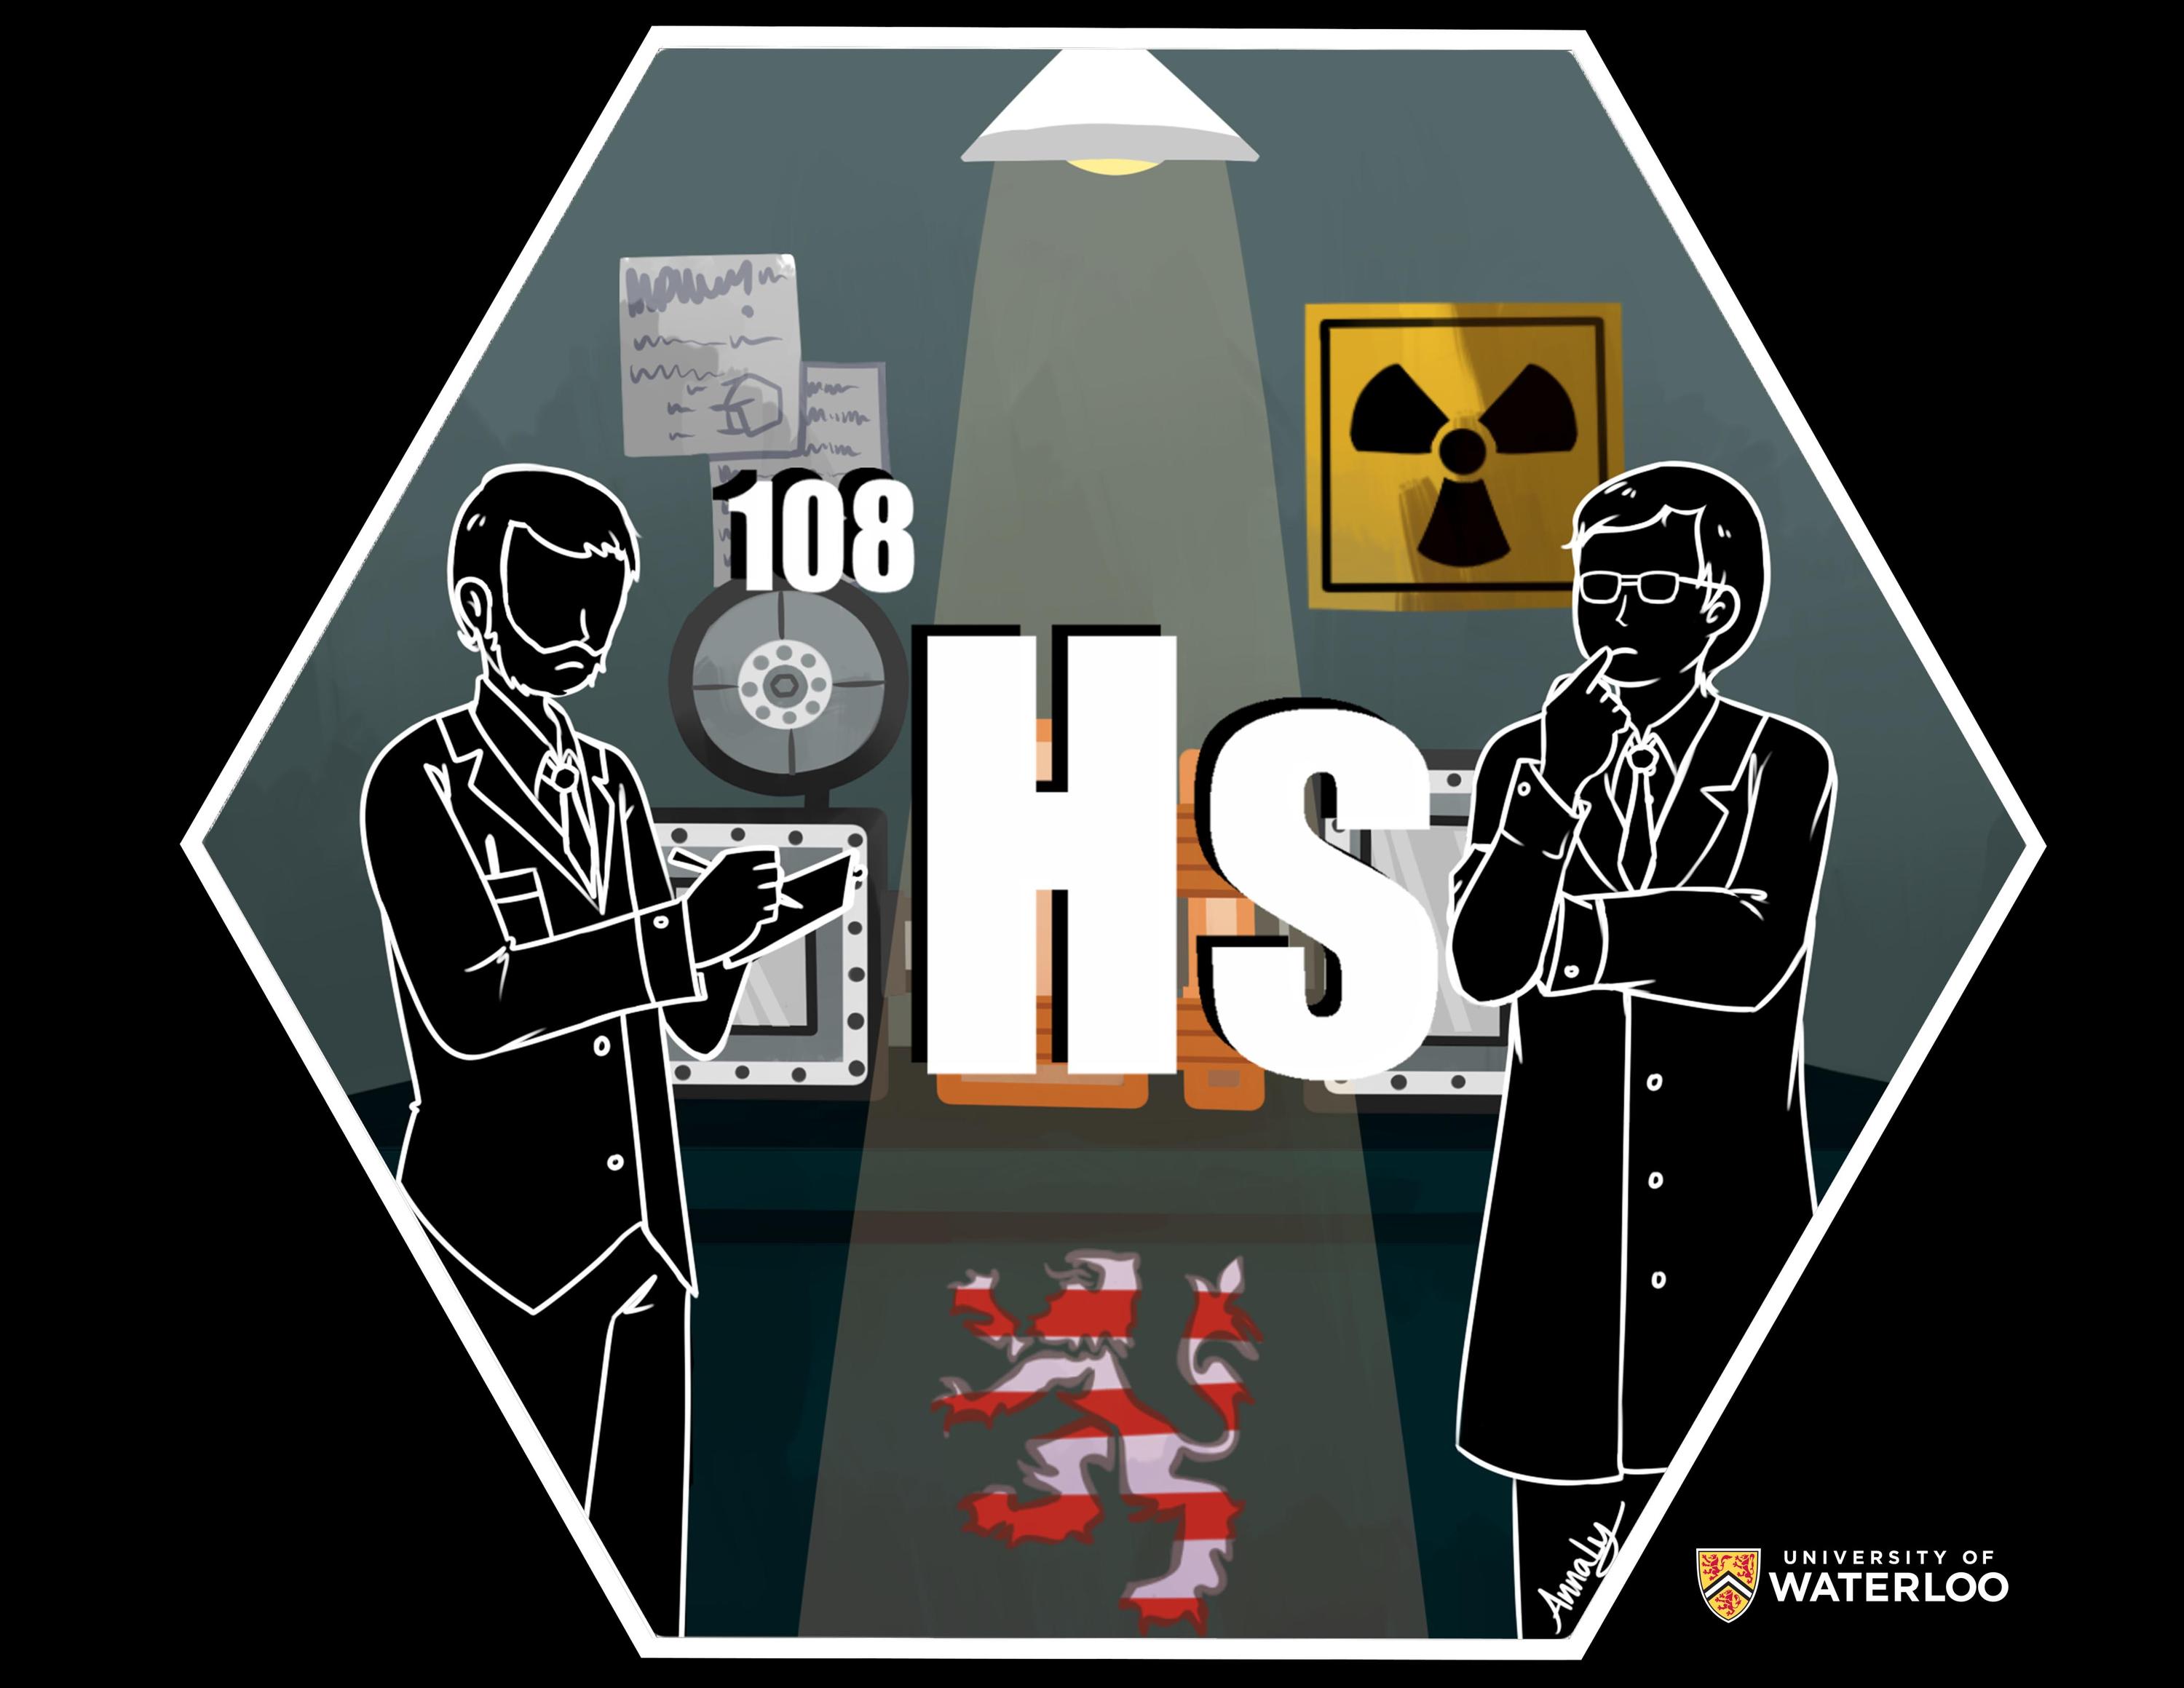 Digital composite. Background shows a grey laboratory with a nuclear symbol on the wall. Centre foreground is the chemical symbol “Hs” and “108” lit up by an interrogation lamp. Two scientists - Peter Armbruster and Gottfried Münzenber – are outlined in white and appear on each side of the symbol. Below is the Hesse state symbol of a red and white stripped lion.